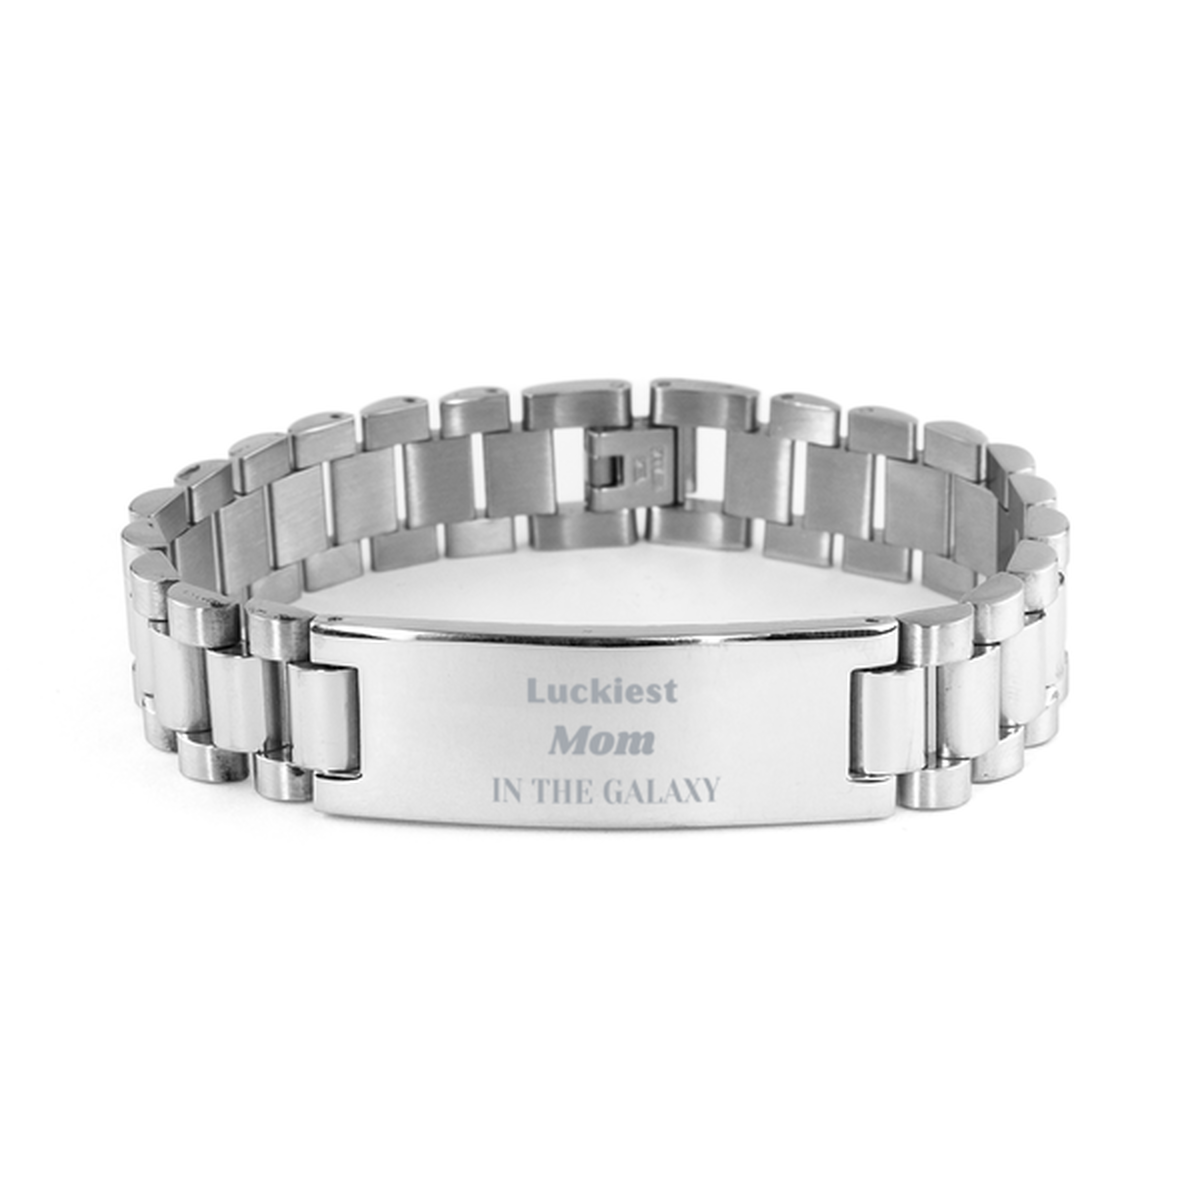 Luckiest Mom in the Galaxy, To My Mom Engraved Gifts, Christmas Mom Ladder Stainless Steel Bracelet Gifts, X-mas Birthday Unique Gifts For Mom Men Women